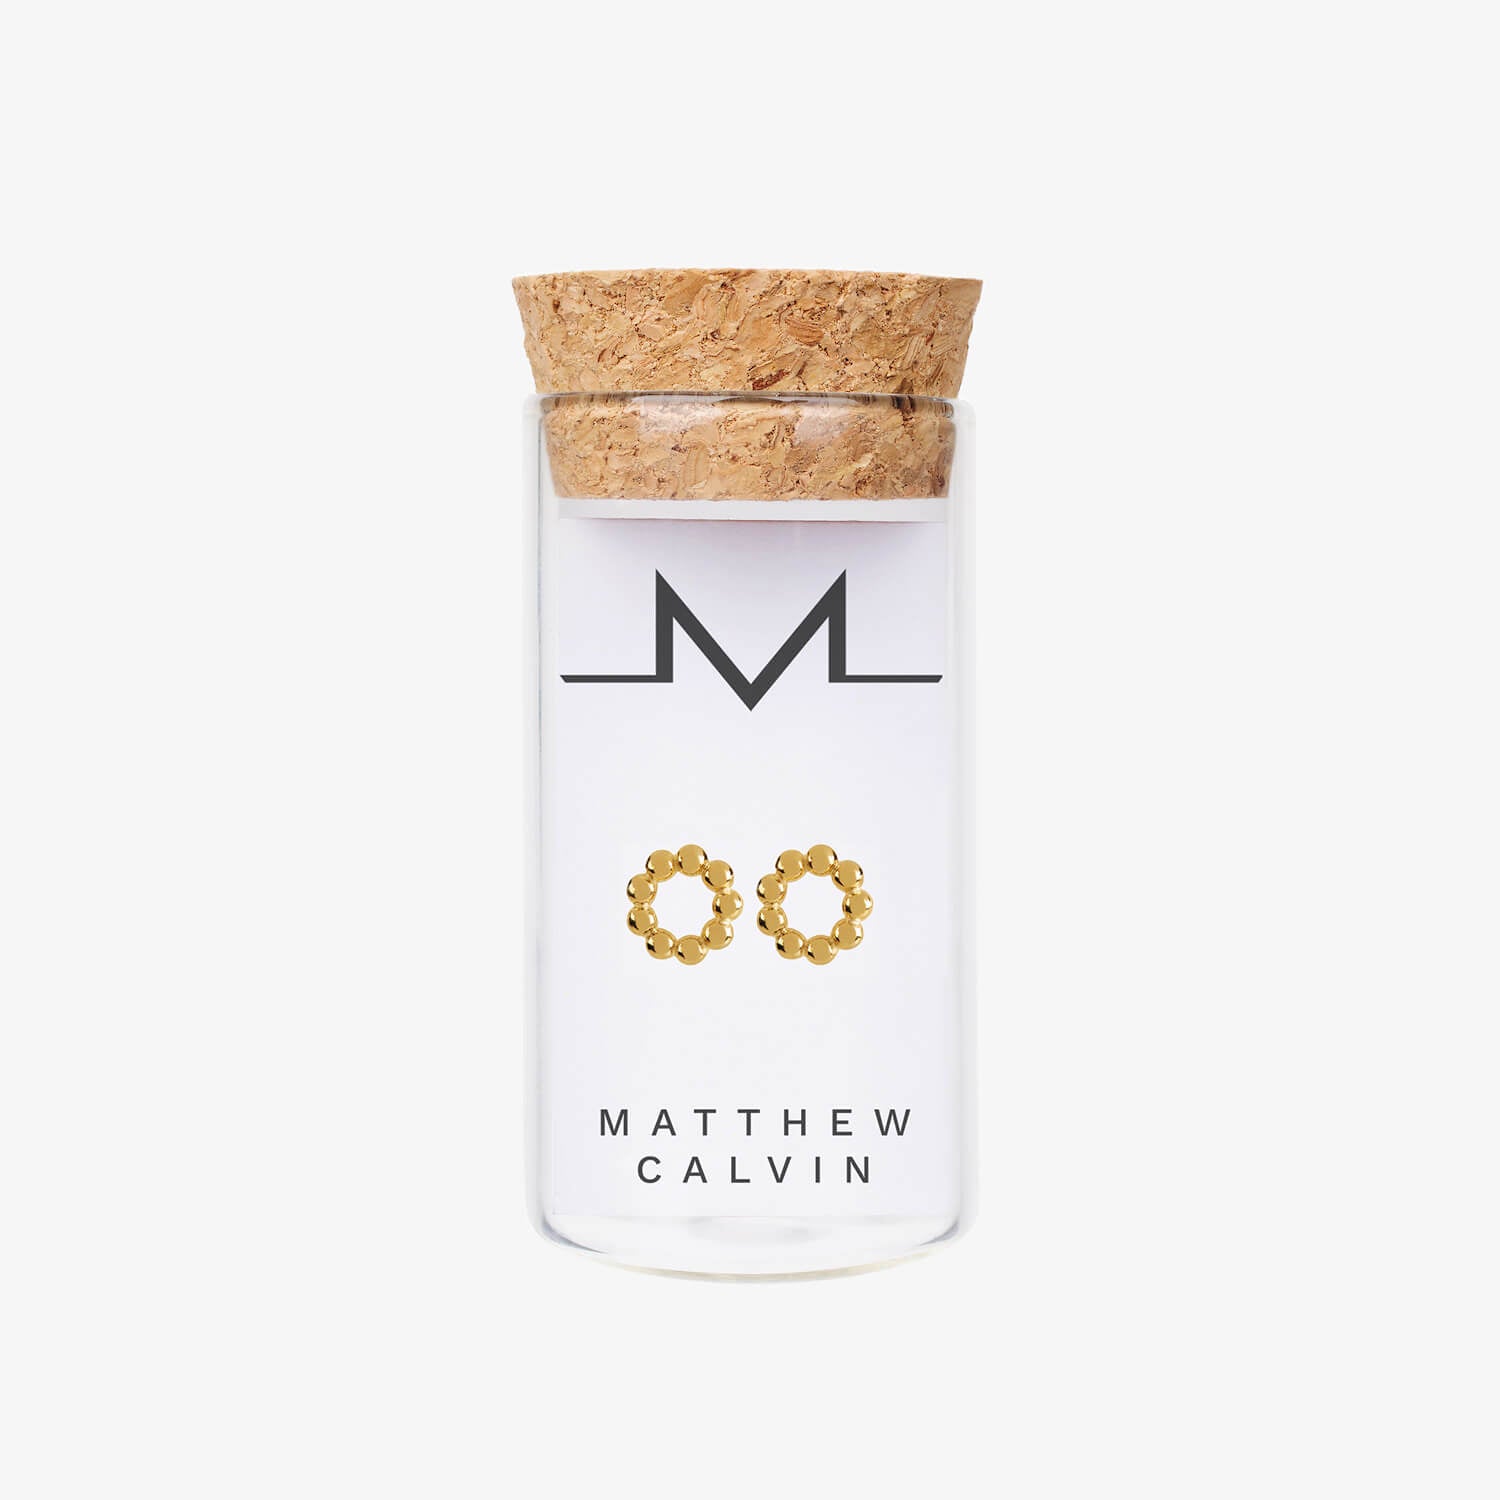 gold vermeil beaded circular studs by matthew calvin presented in a glass tube with a cork stopper on a white background